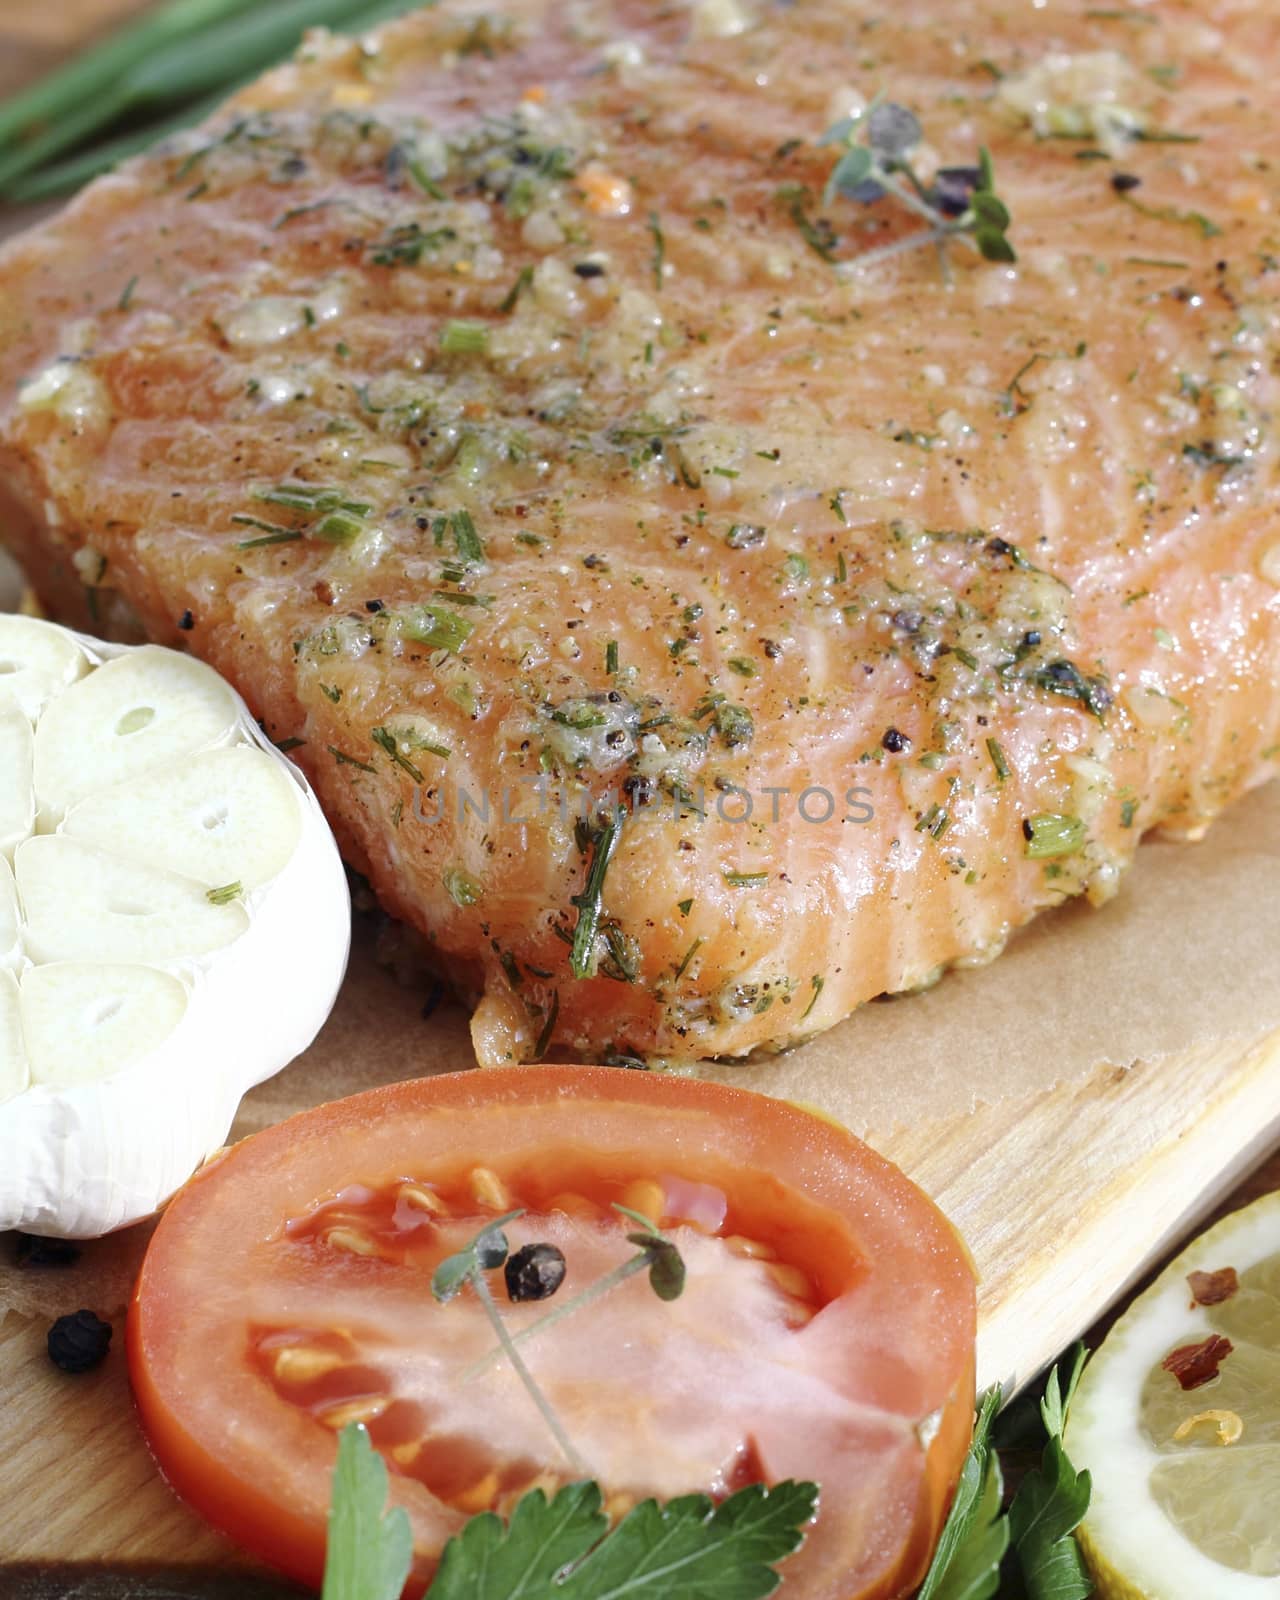 Salted salmon fillet by openas